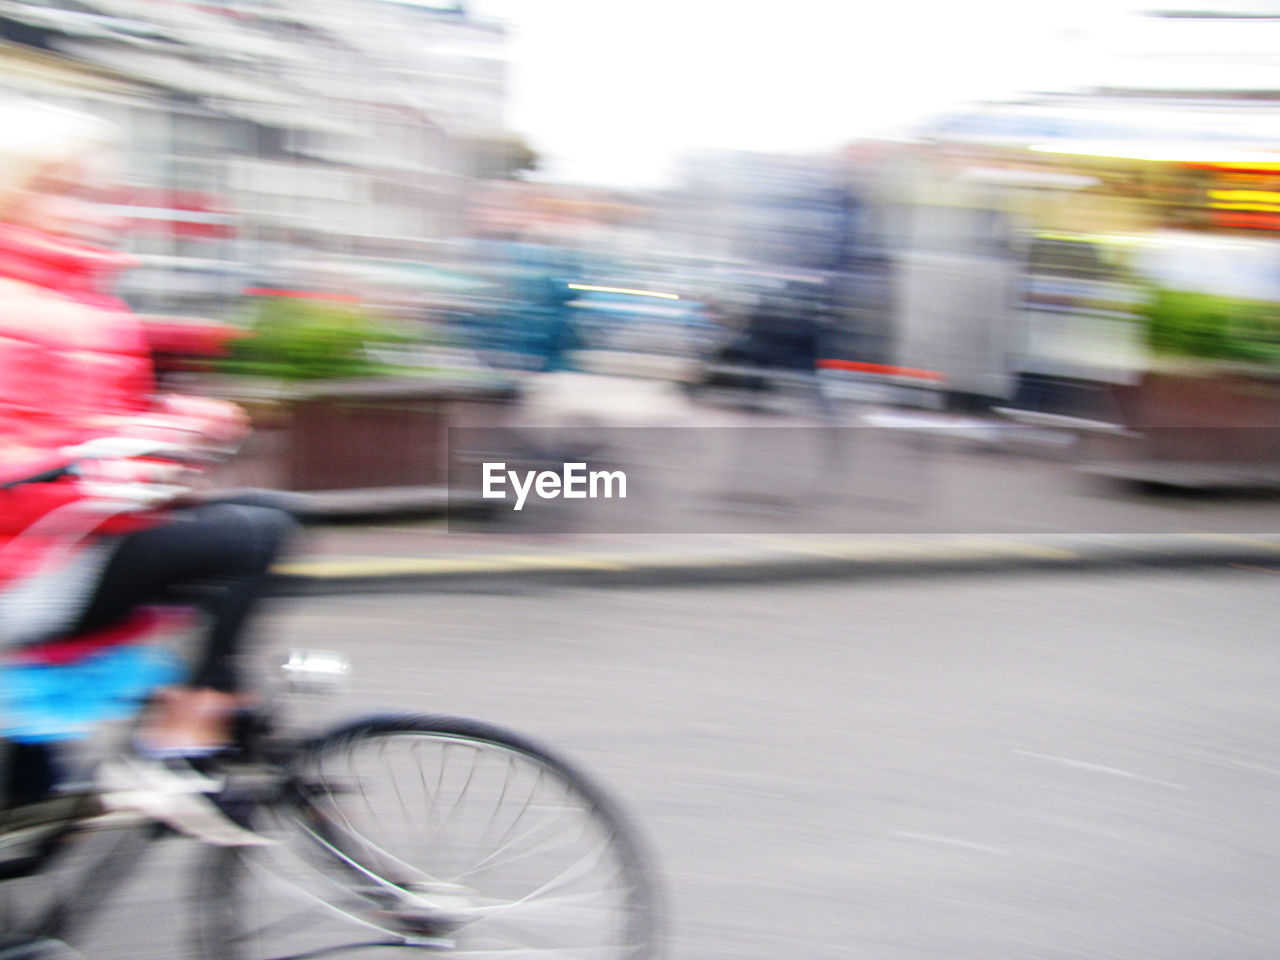 BLURRED MOTION OF PERSON RIDING BICYCLE